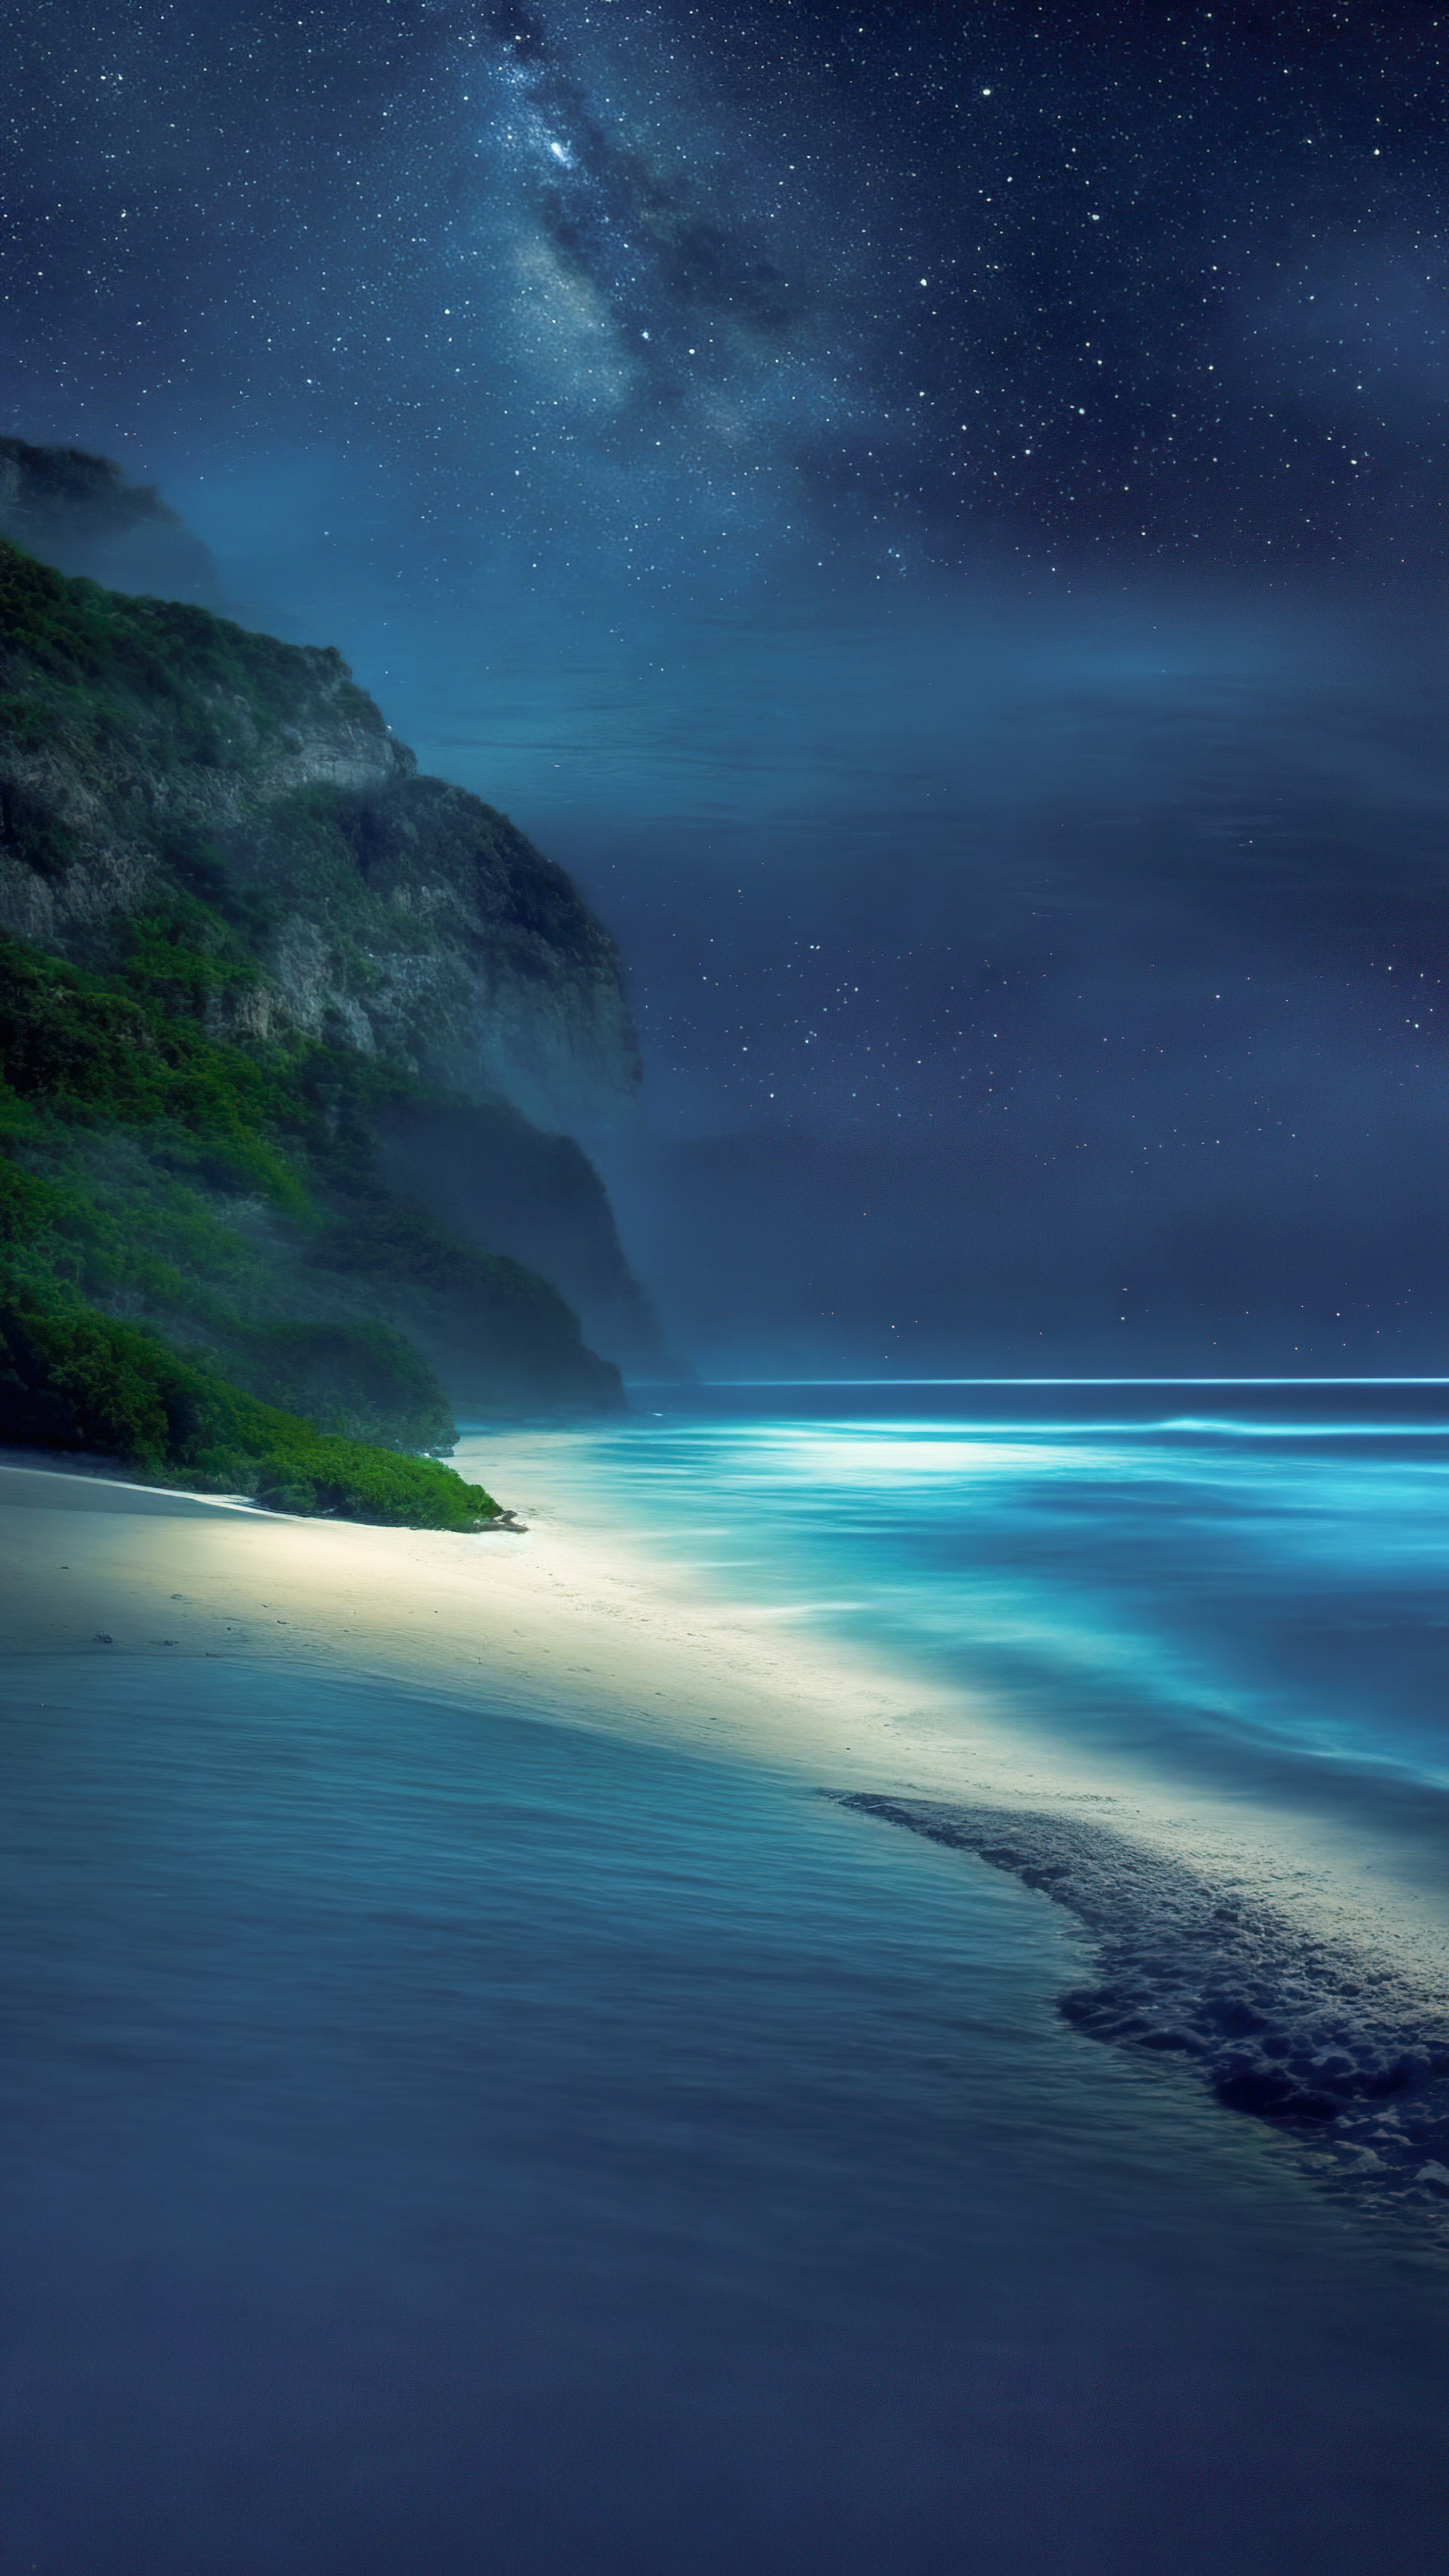 Transform your device’s screen with our beach landscape wallpaper, depicting a tranquil beach at night, with the waves gently lapping the shore and a canopy of stars above.